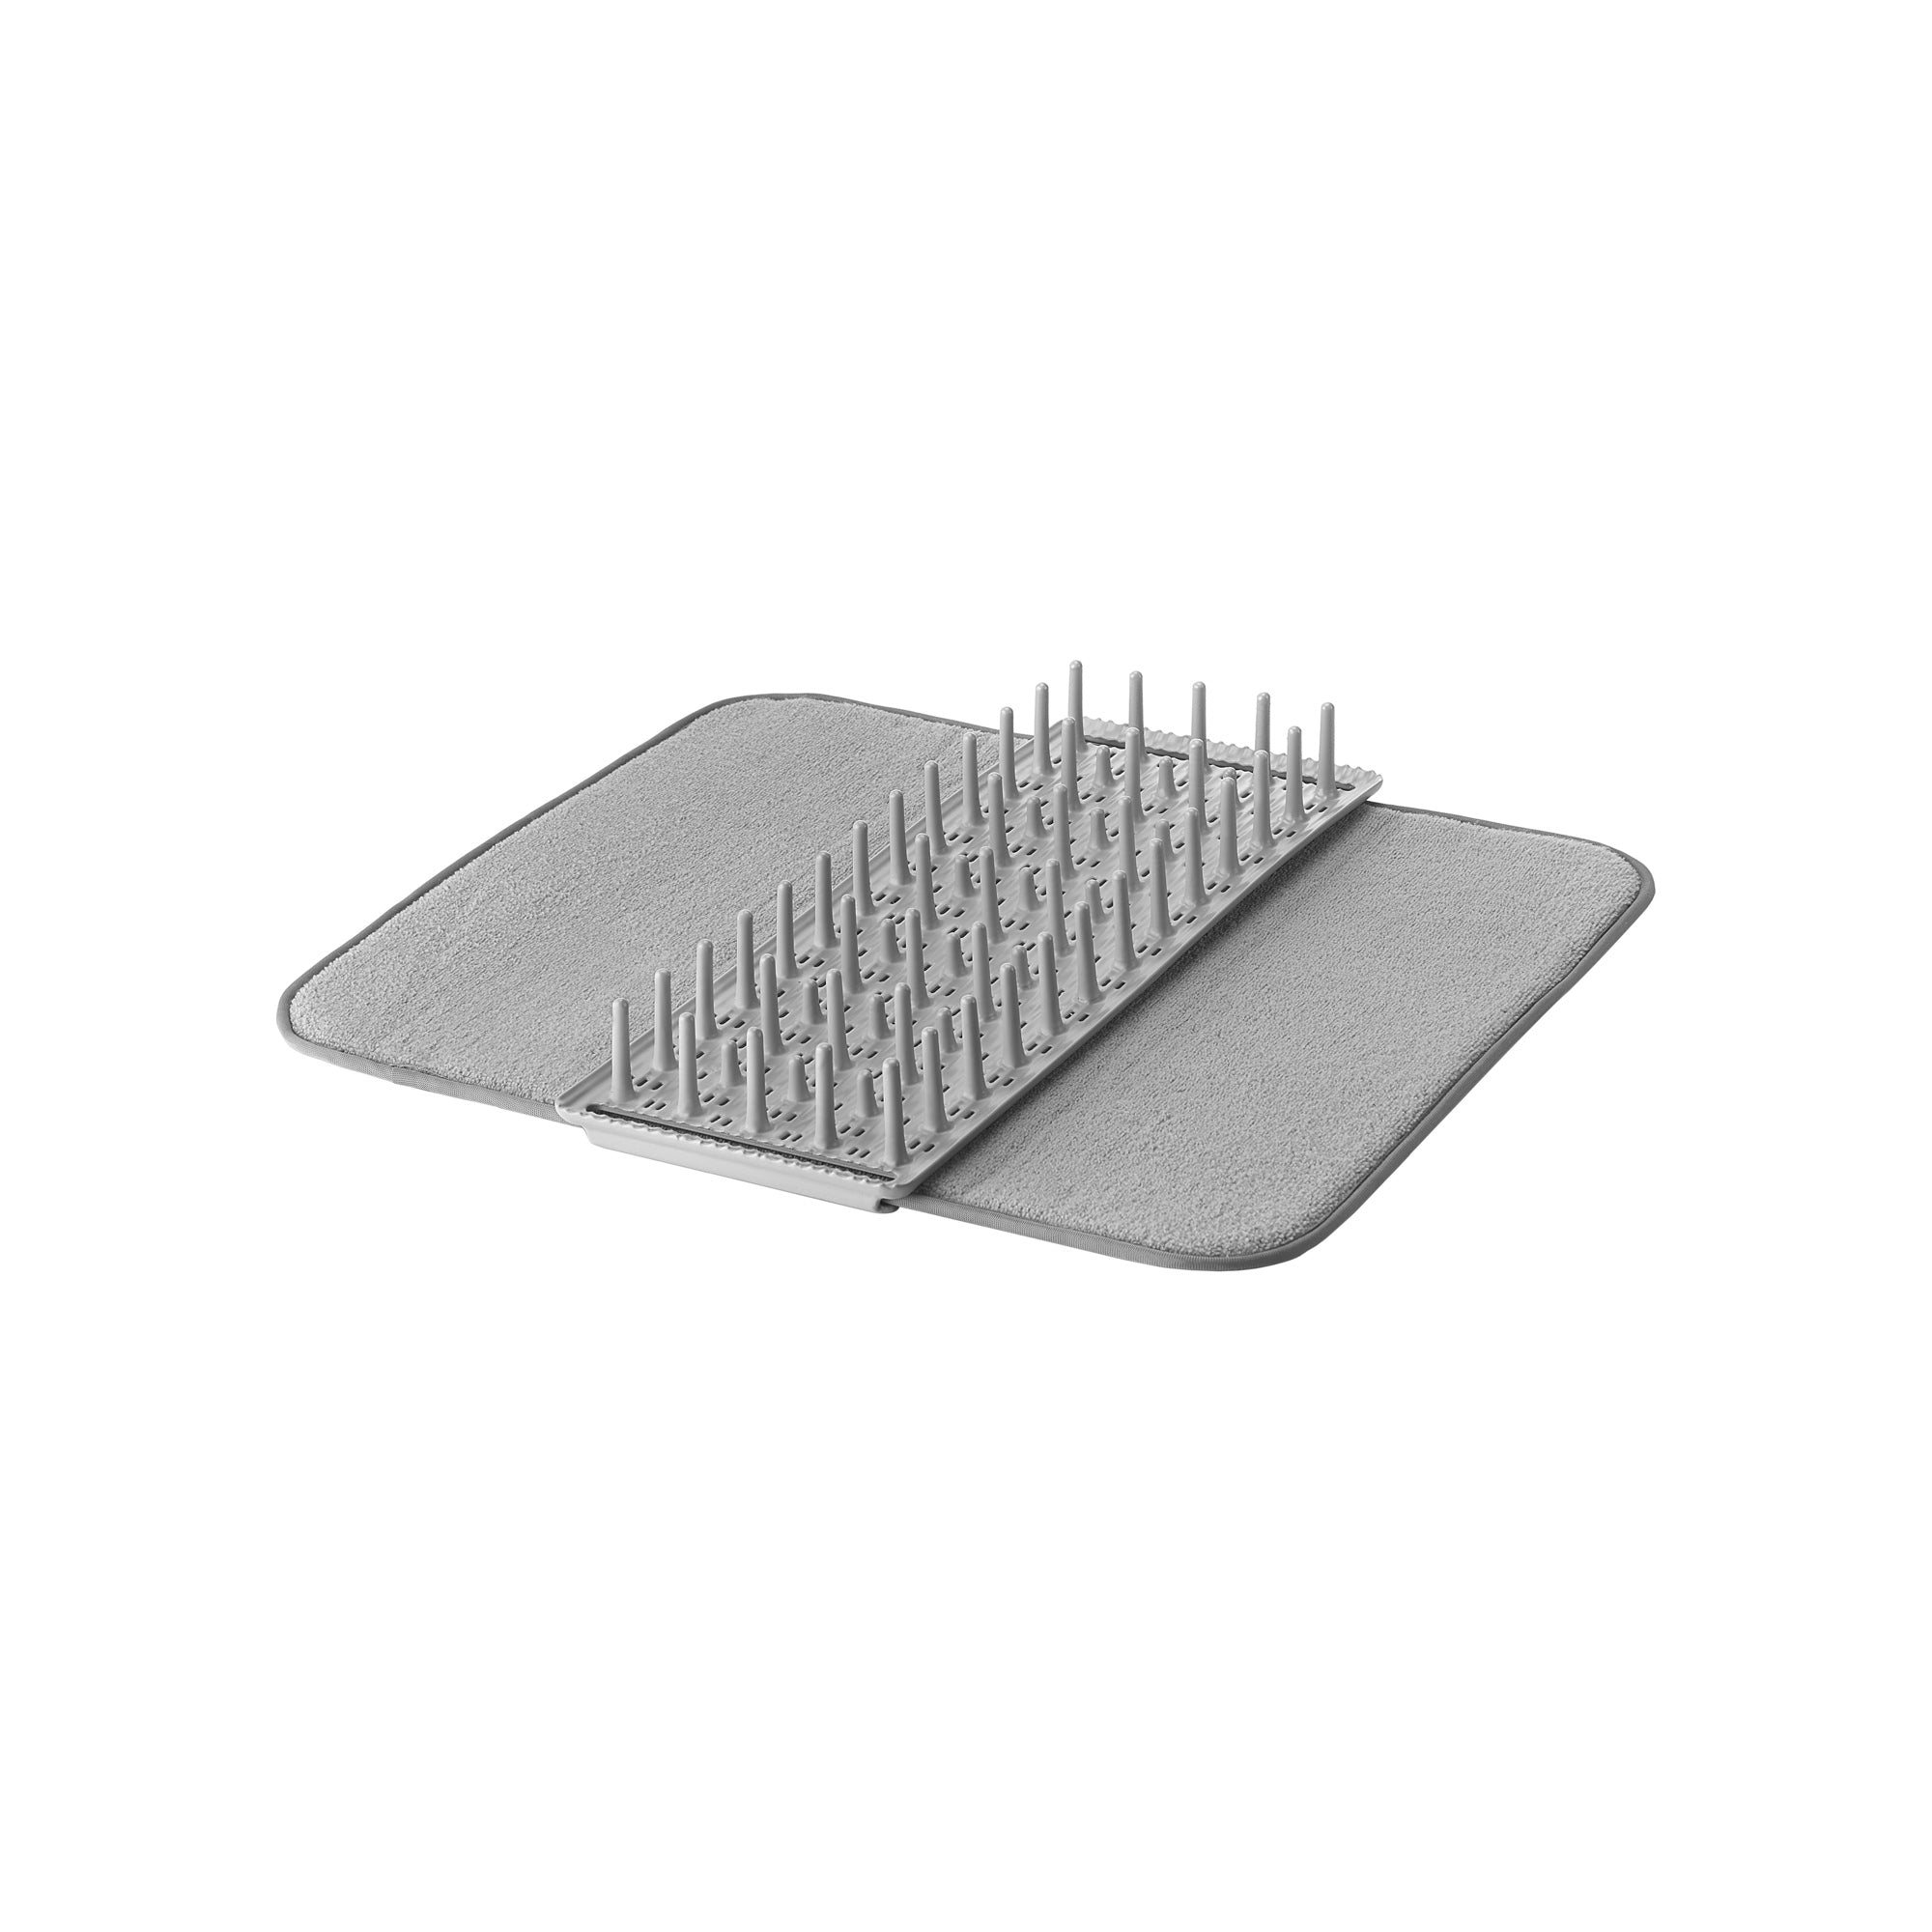 DISH DRAINER WITH MAT 'DRY&SAFE' "ORGANIZATION"